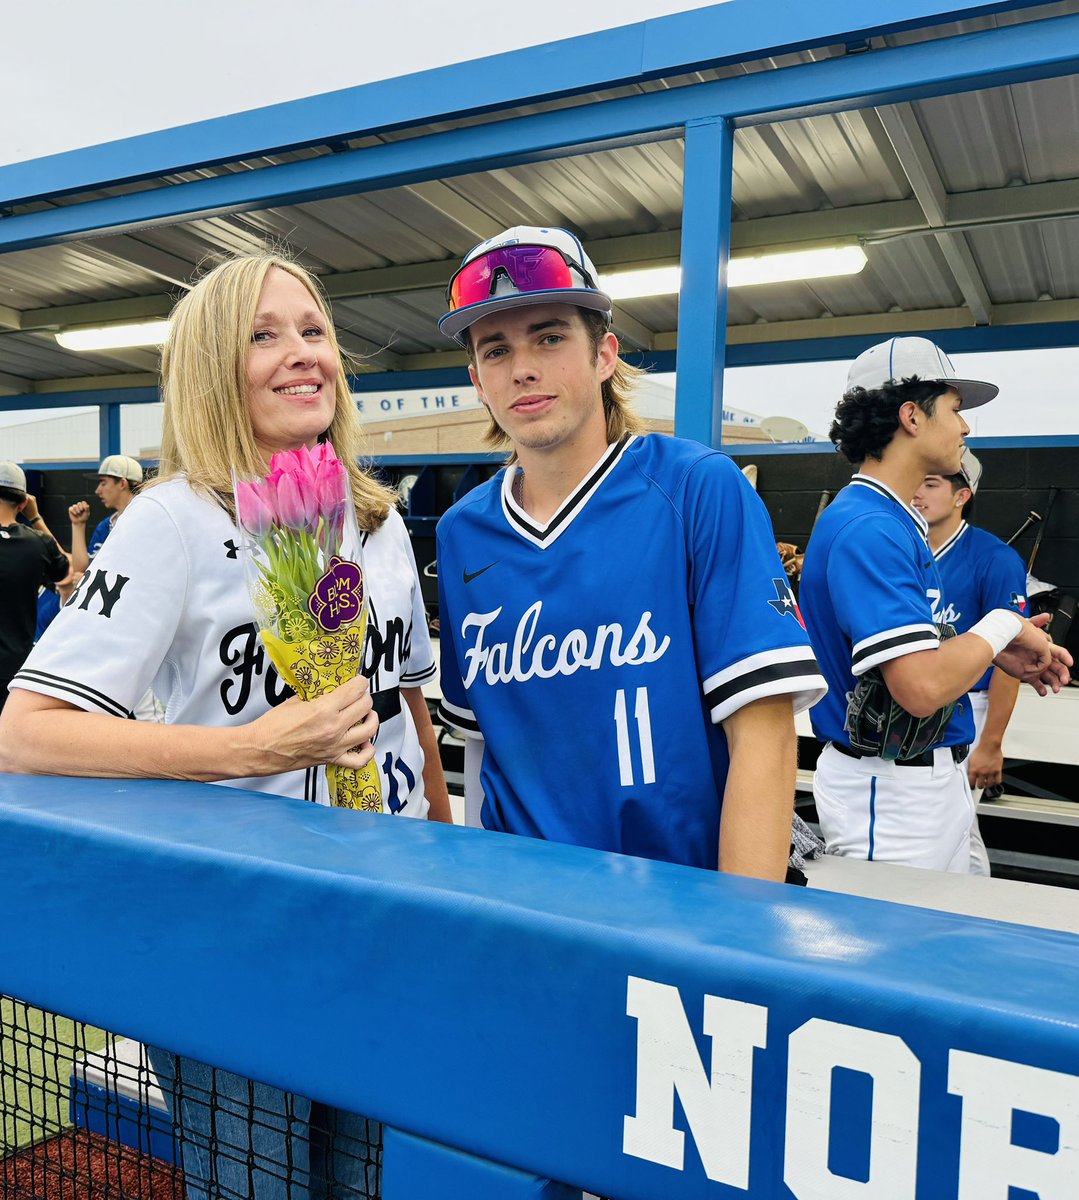 Falcon Baseball celebrates NFHS teachers! We 💙 rooting for our players in our classrooms and on the diamond!! #trueNorth #empower @forneyisd @justinwterry @DrPattonNFHS